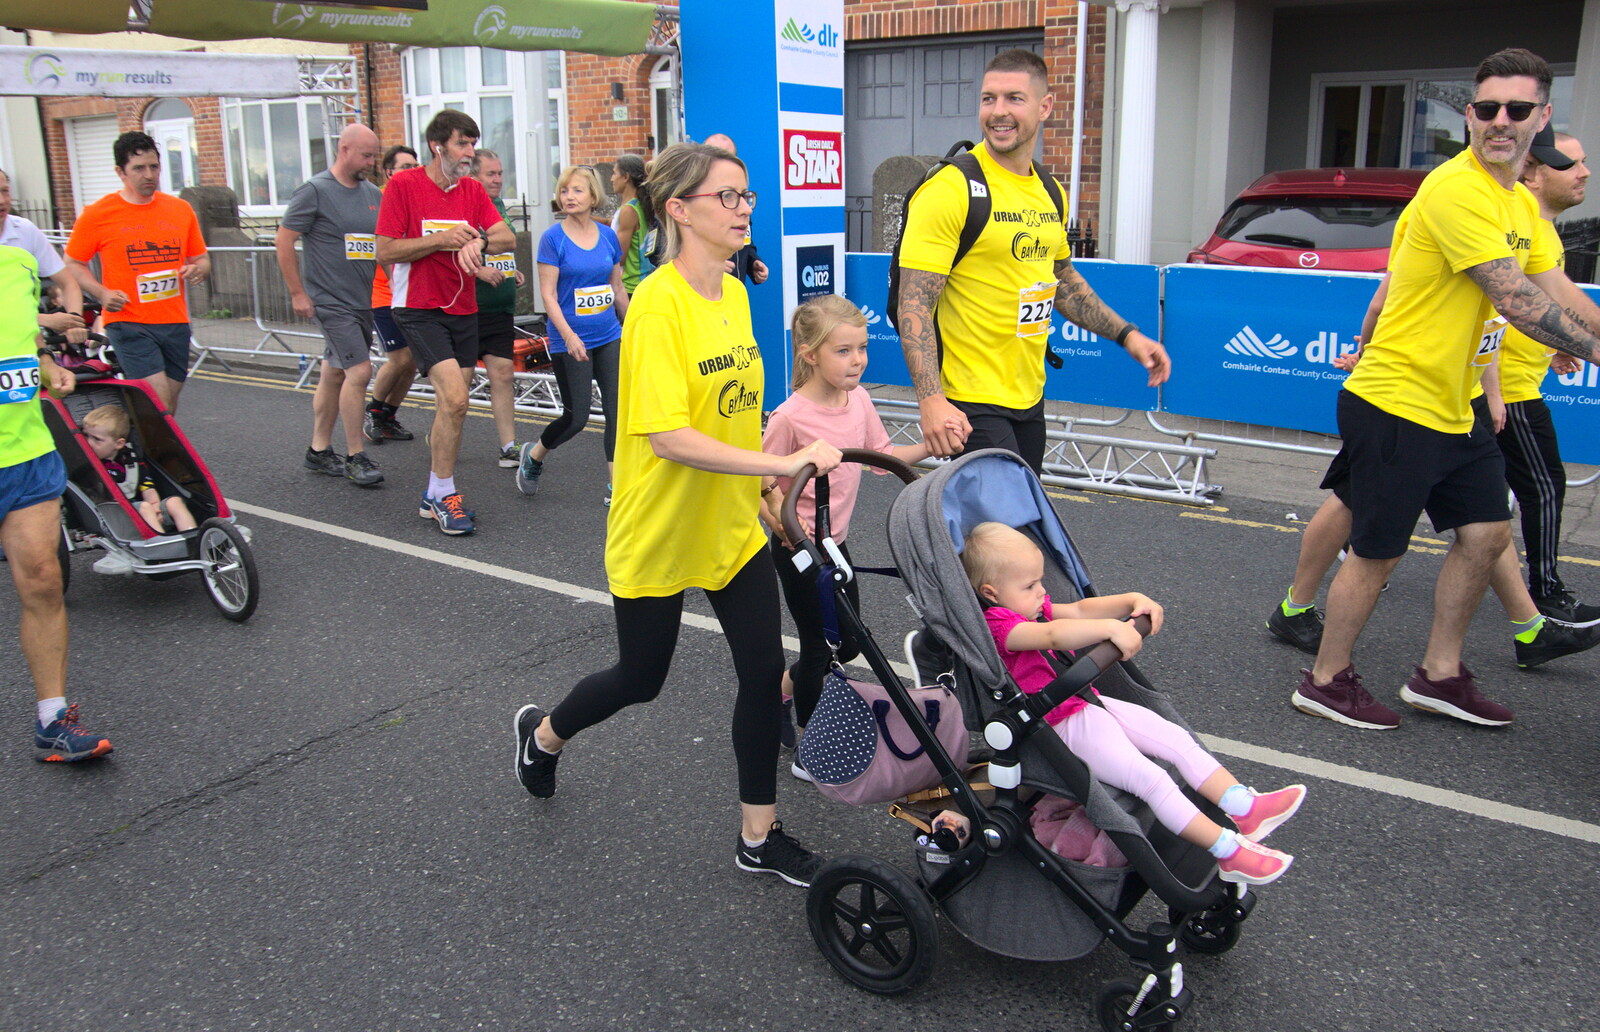 More buggy runners from The Dún Laoghaire 10k Run, County Dublin, Ireland - 6th August 2018